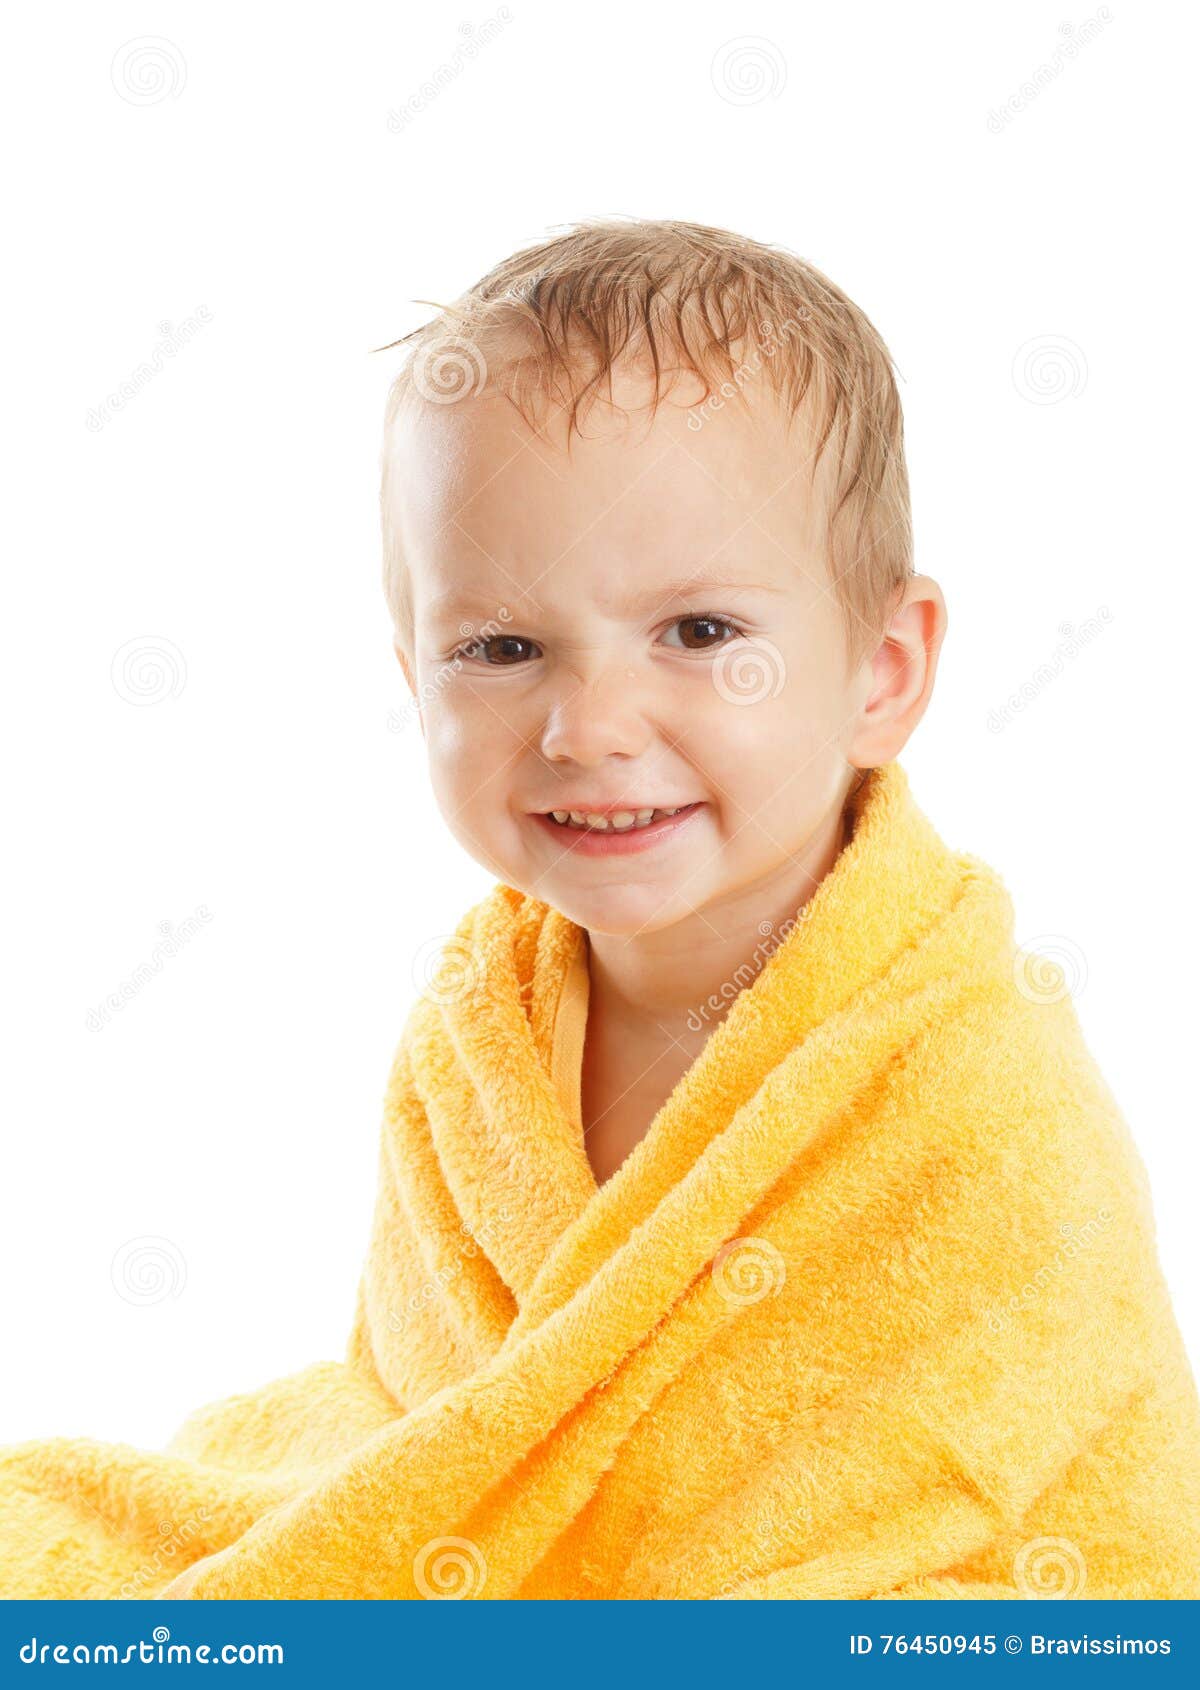 Happy Baby Wearing Yellow Towel Sitting after Bath or Shower. Stock ...